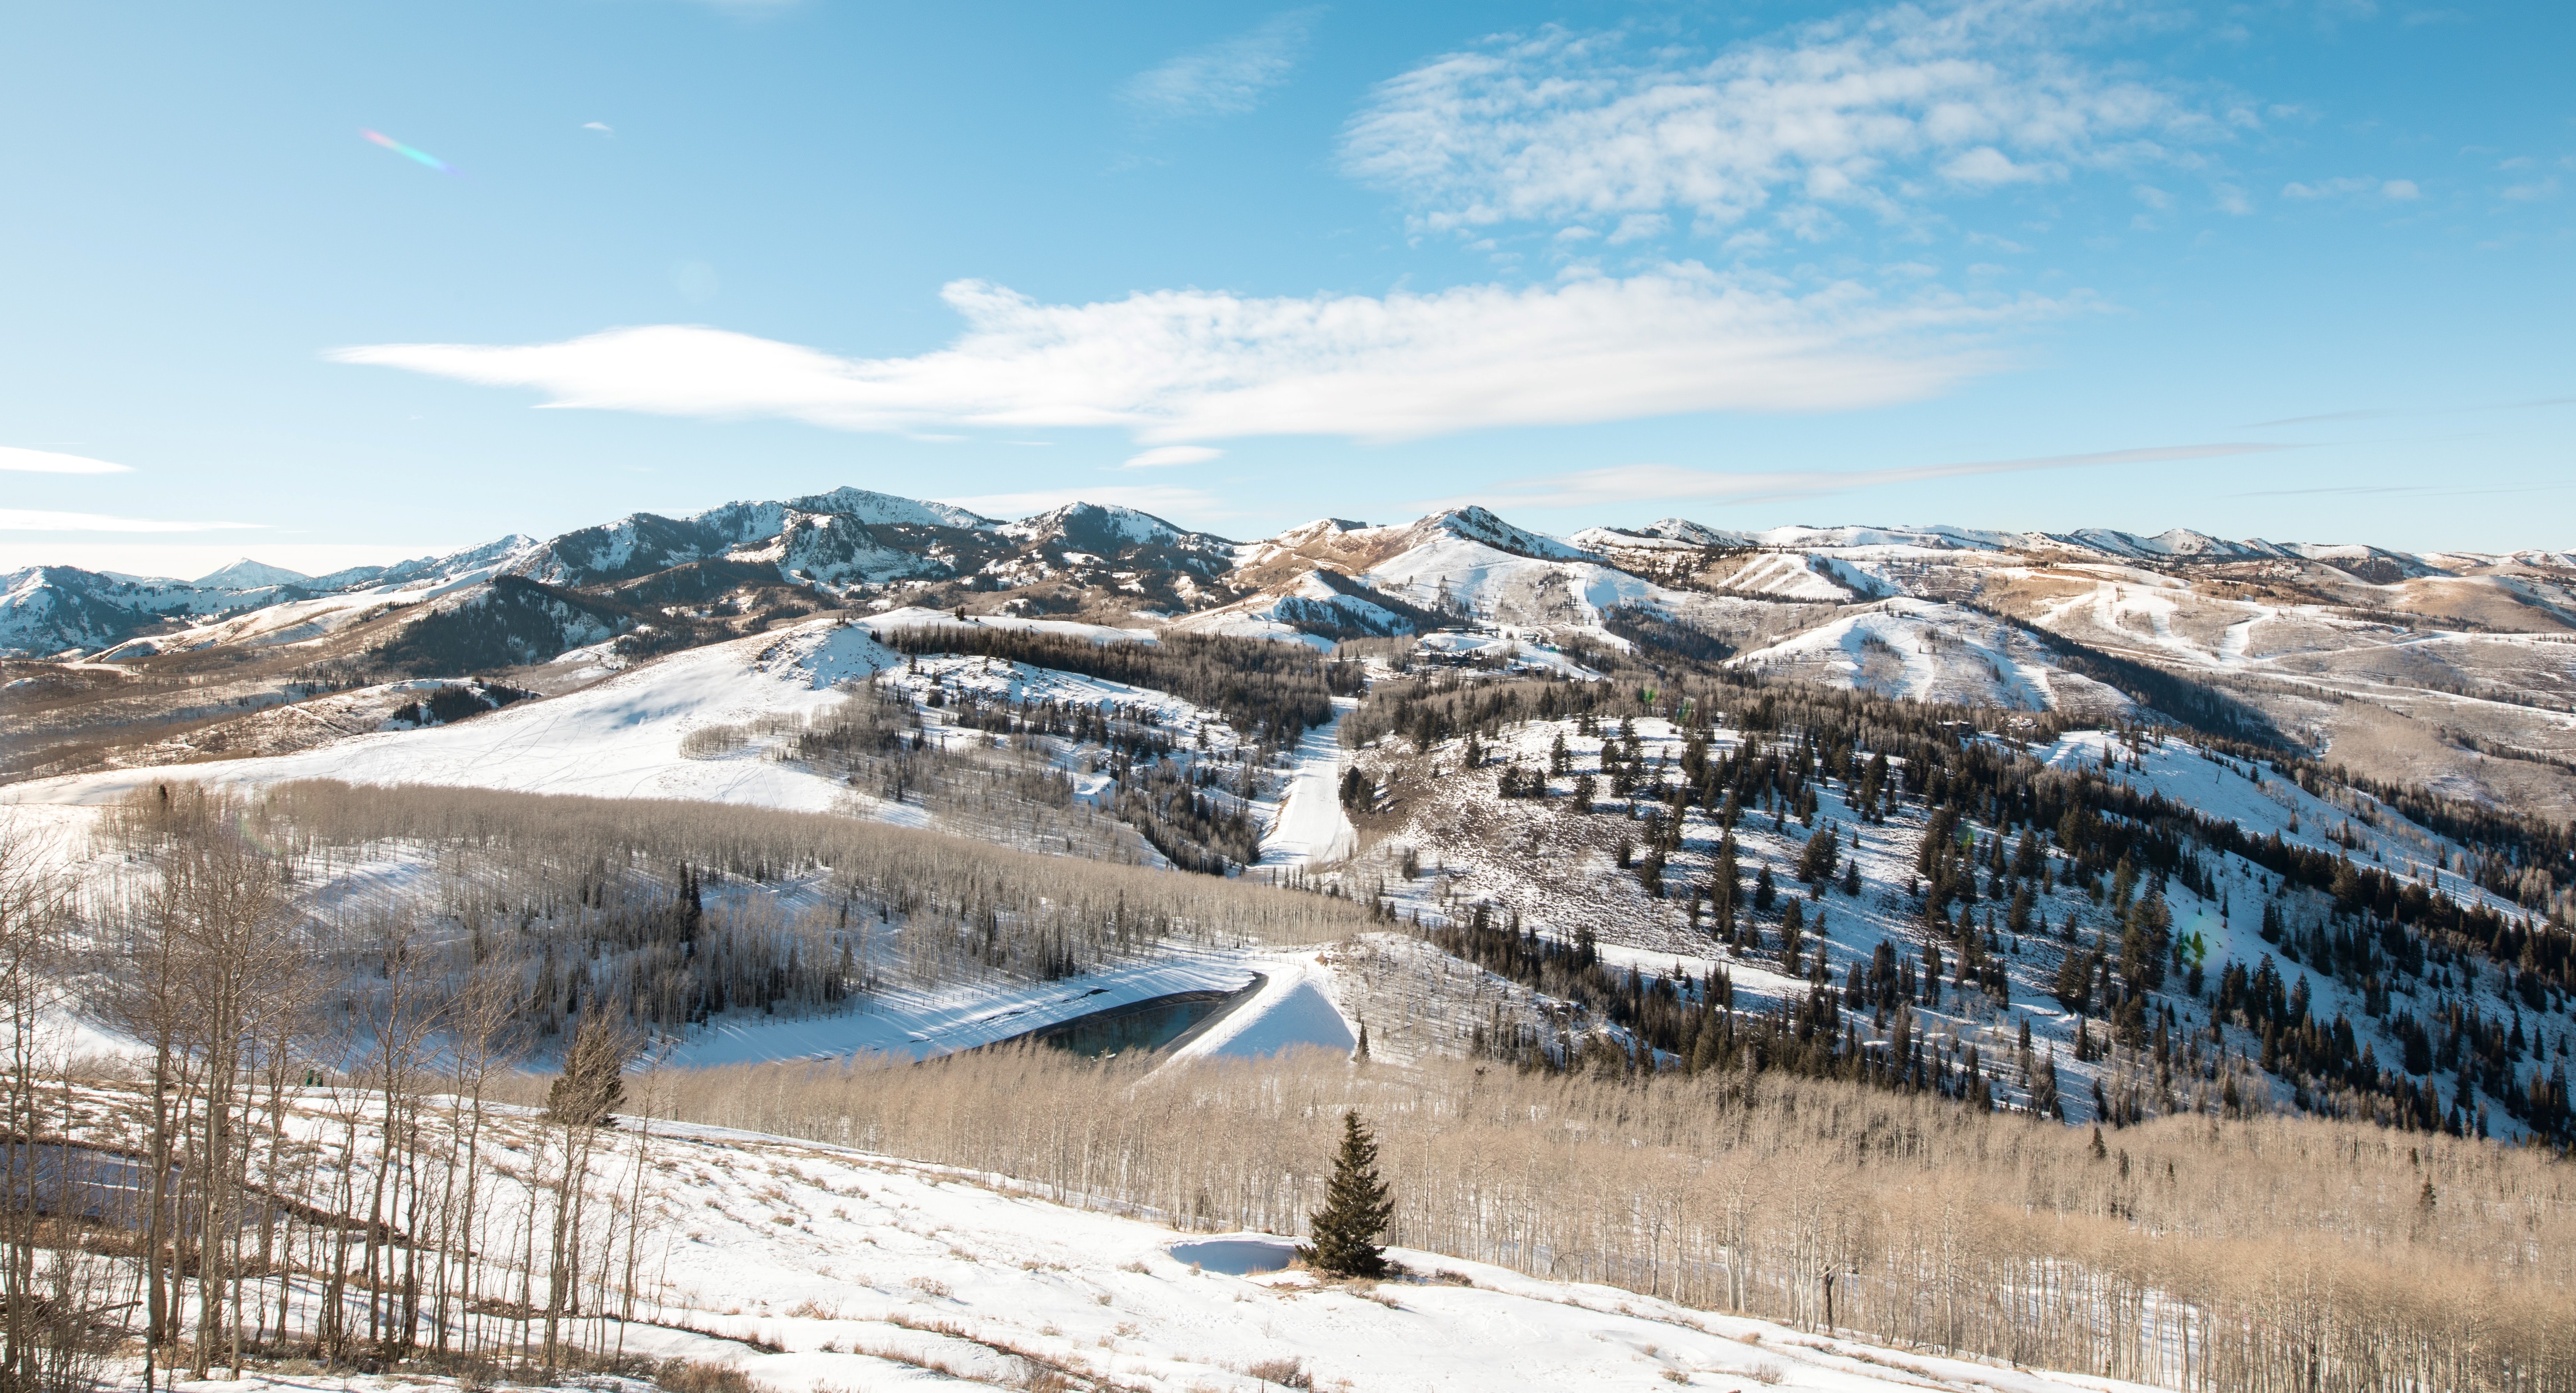 What is the difference between Park City and Deer Valley?